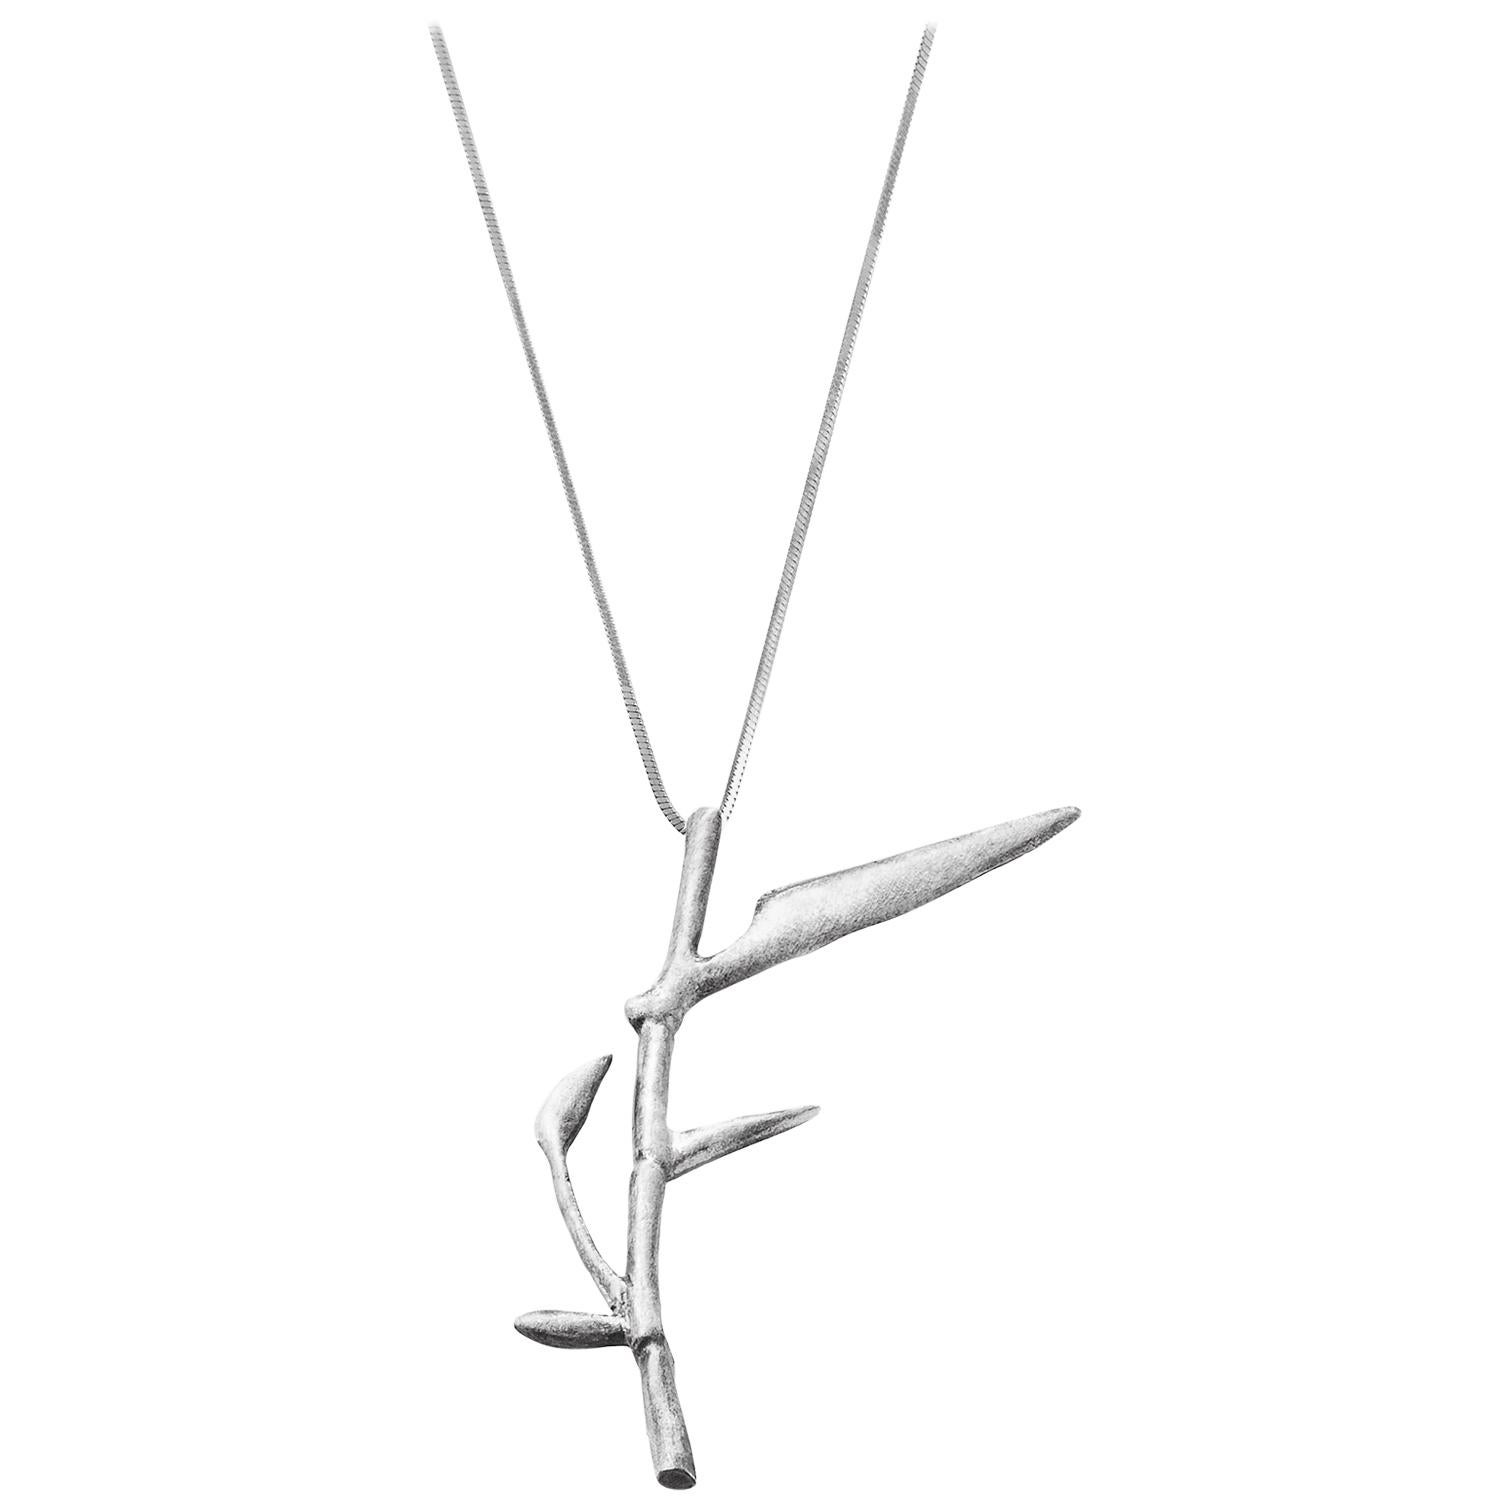 Contemporary Bamboo Pendant Necklace in Sterling Silver N3